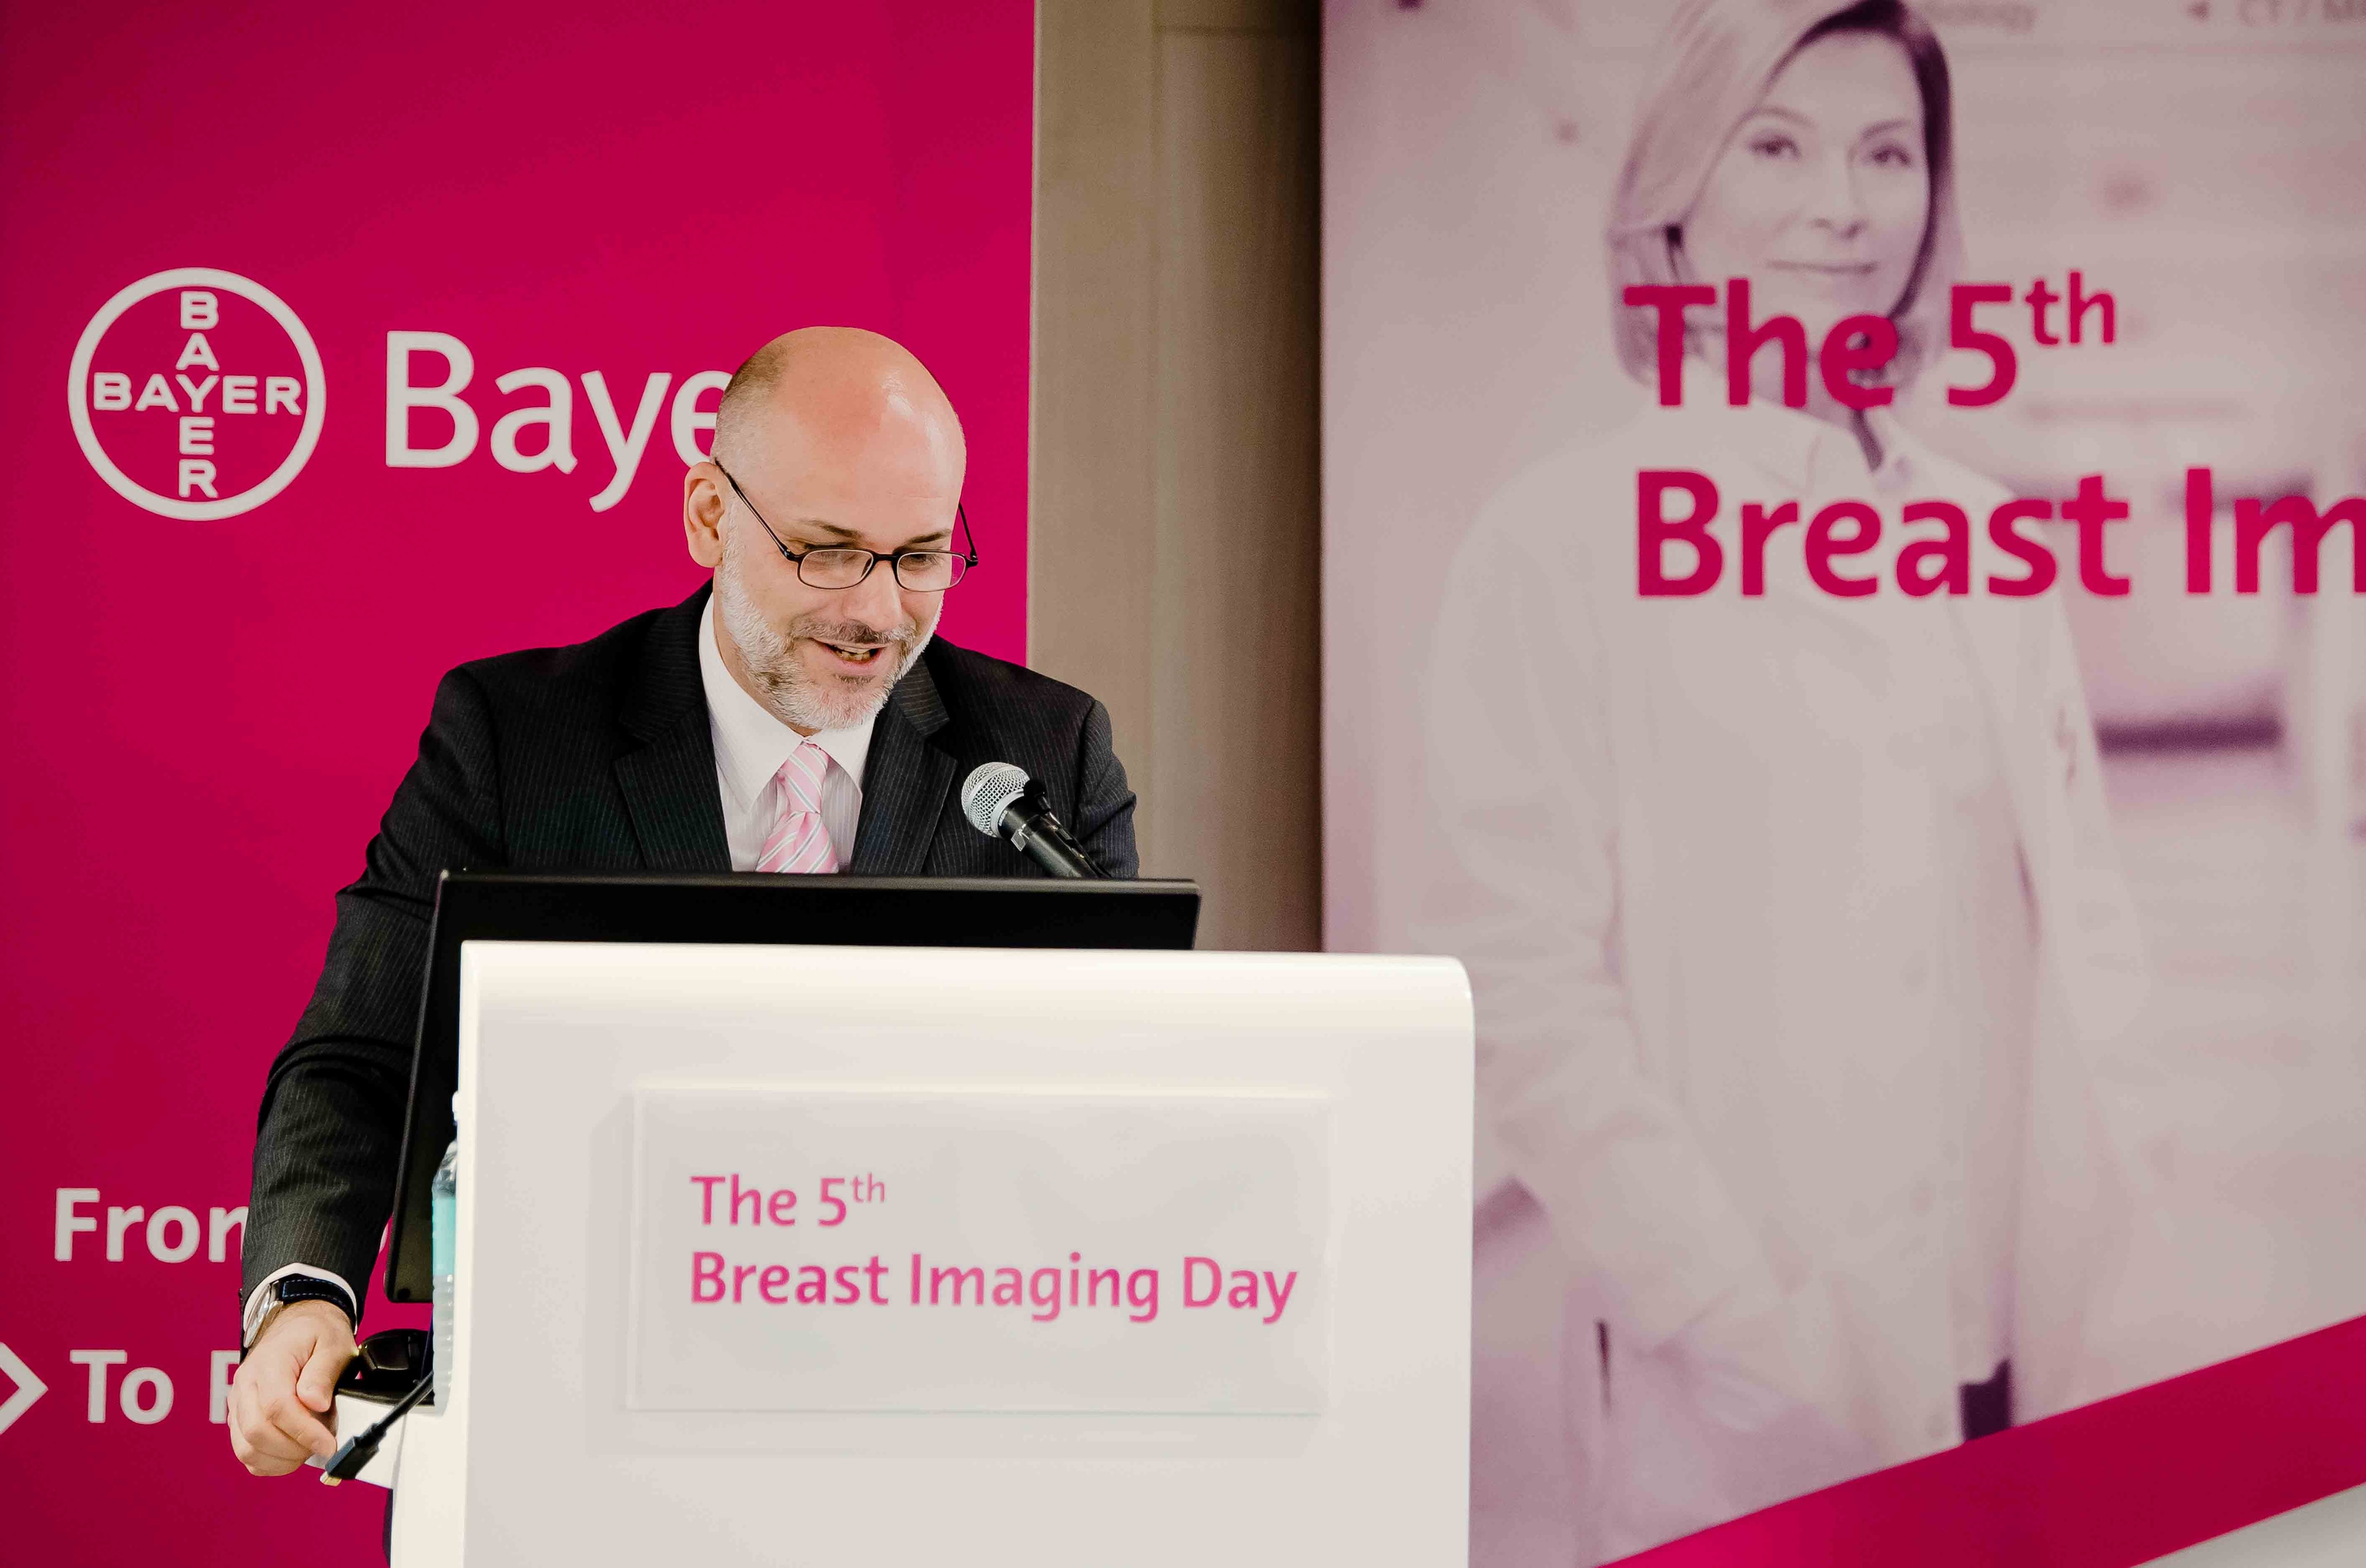 Breast imaging day 2019 preview image